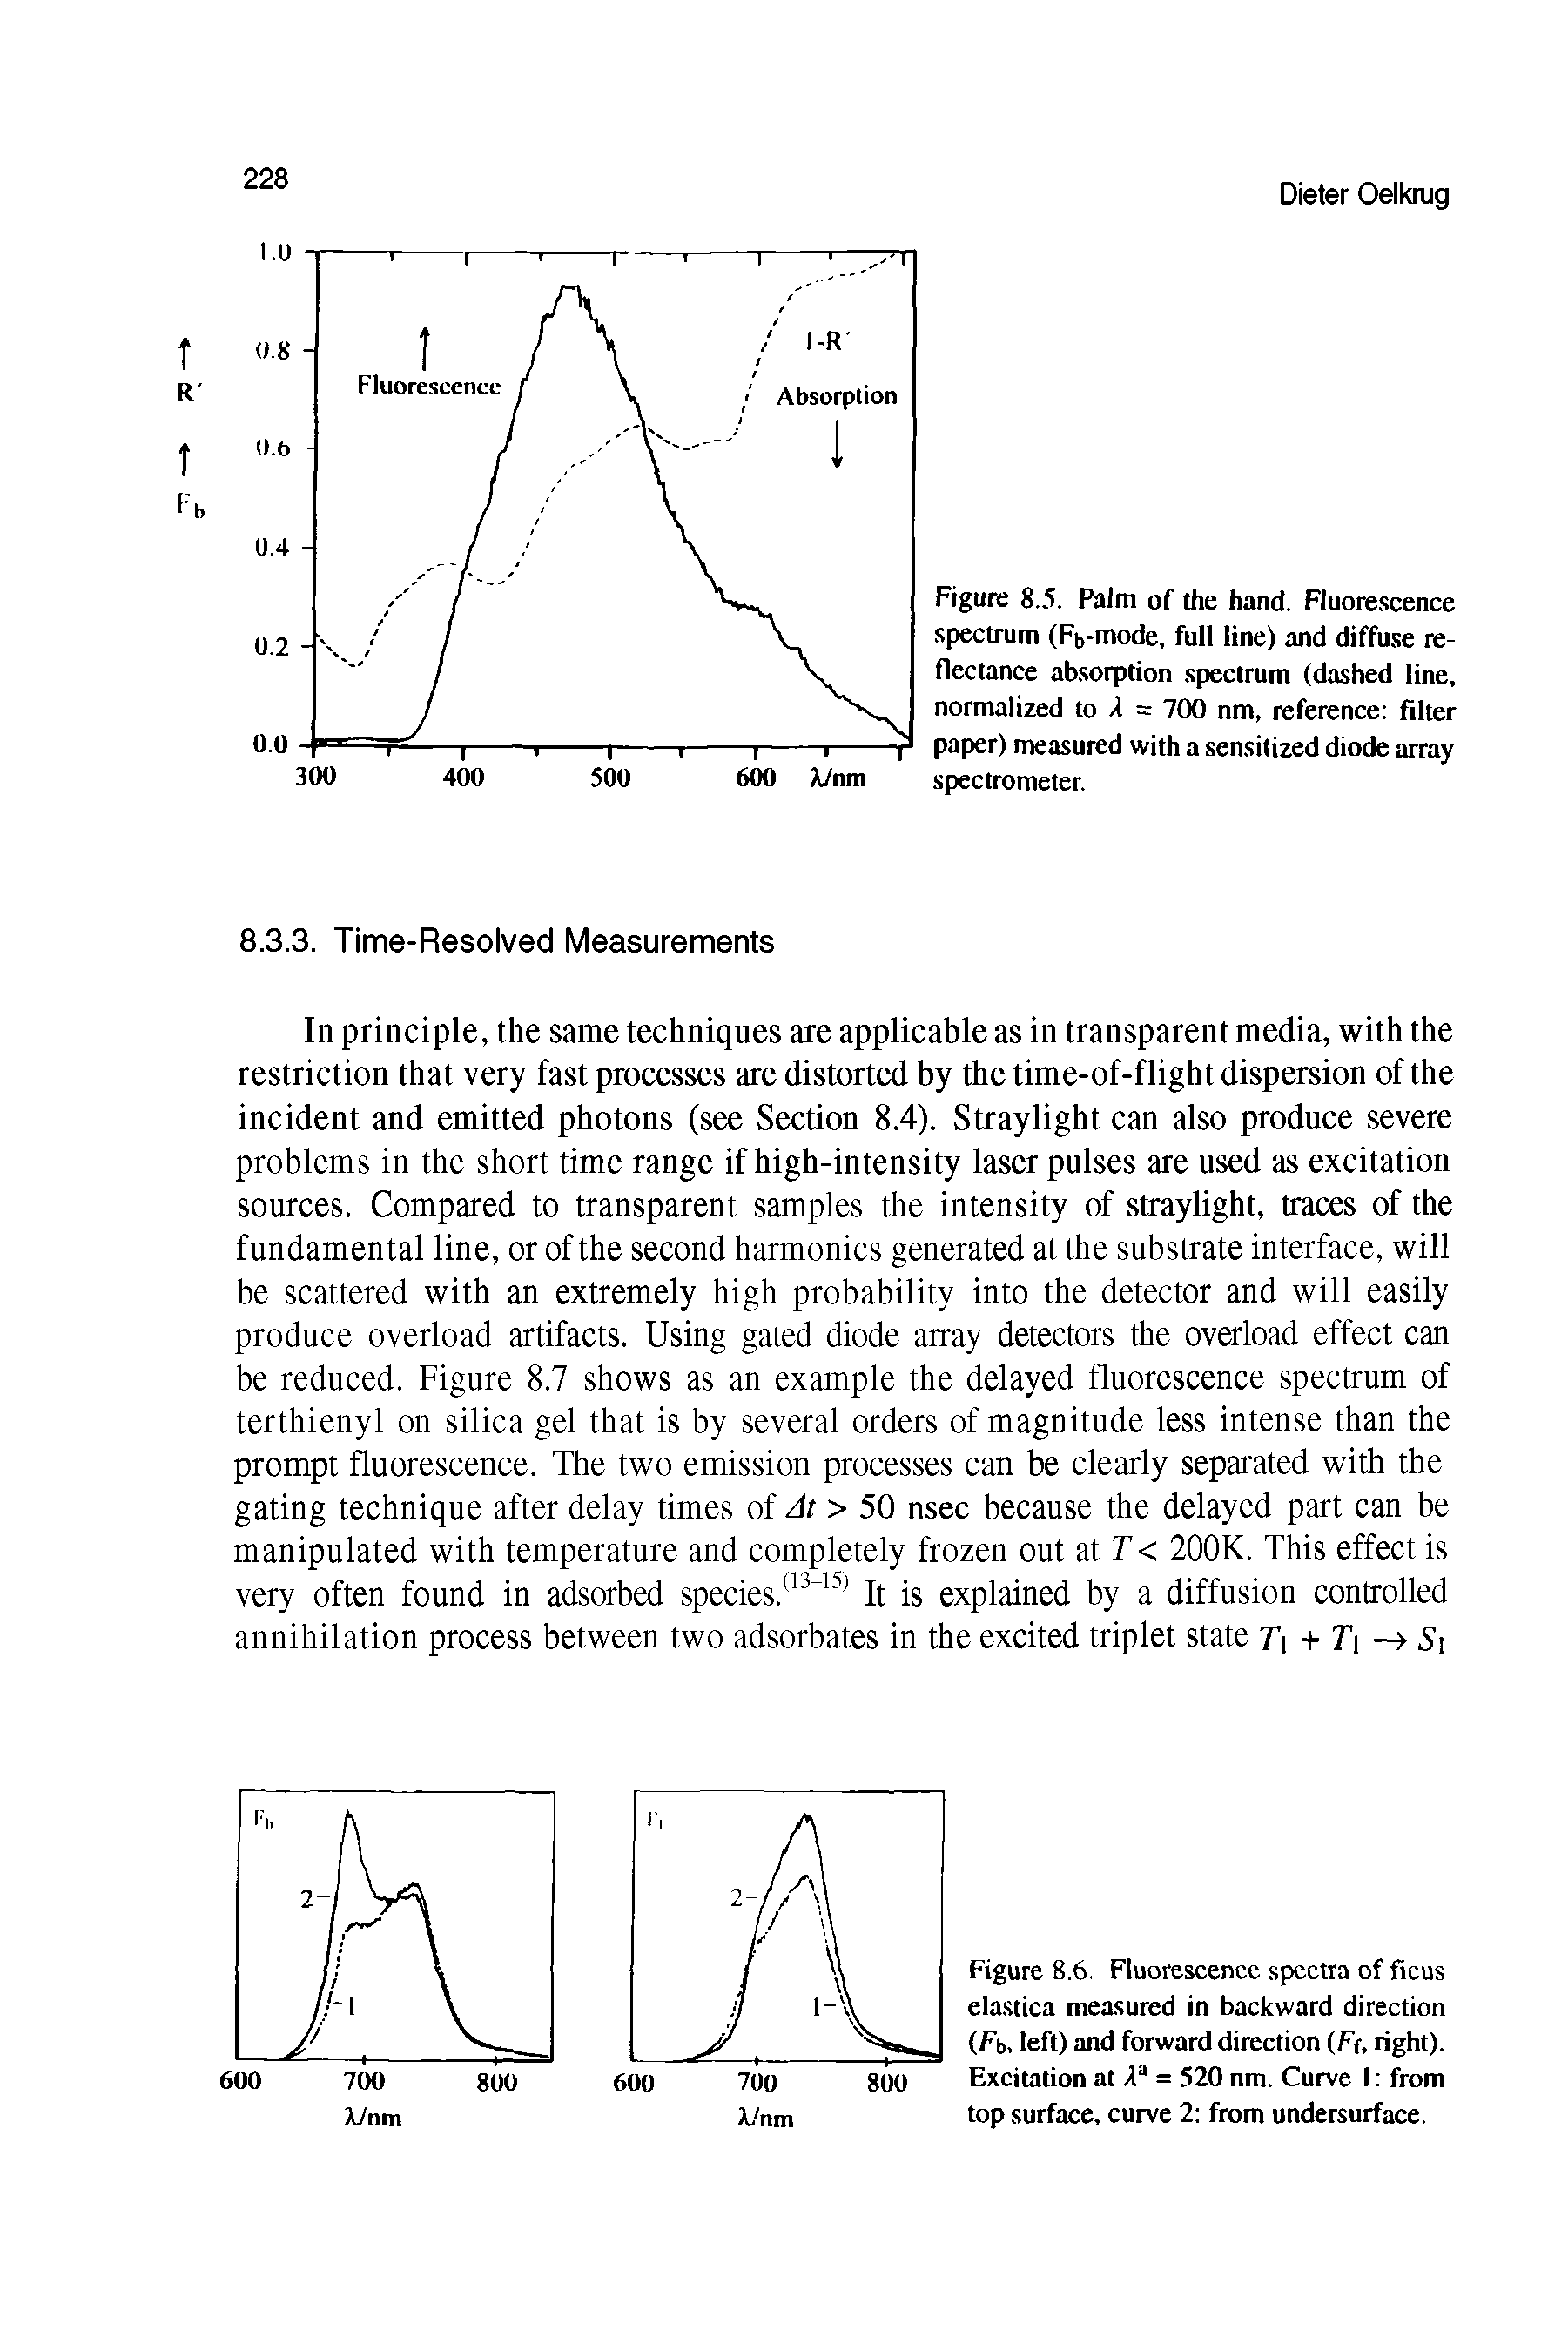 Figure 8.5. Palm of the hand. Fluorescence spectrum (Fb-mode, full line) and diffuse reflectance absorption spectrum (dashed line, normalized to X = 700 nm, reference filter paper) measured with a sensitized diode array spectrometer.